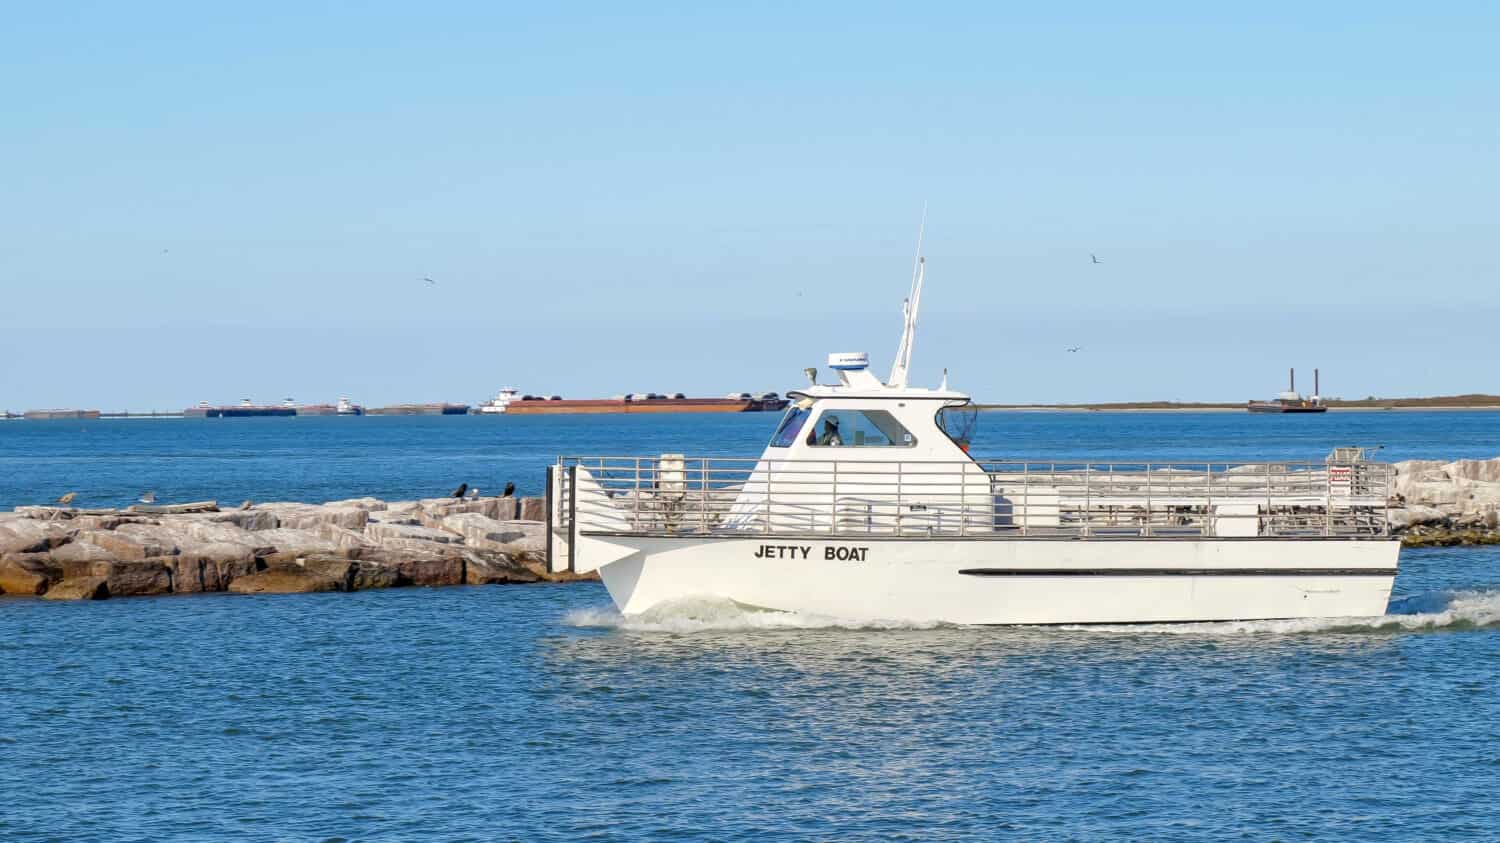 PORT ARANSAS, TX - 27 FEB 2020: Jetty boat leaves the marina entrance on a sunny day as it goes to retrieve passengers from San Jose Island.